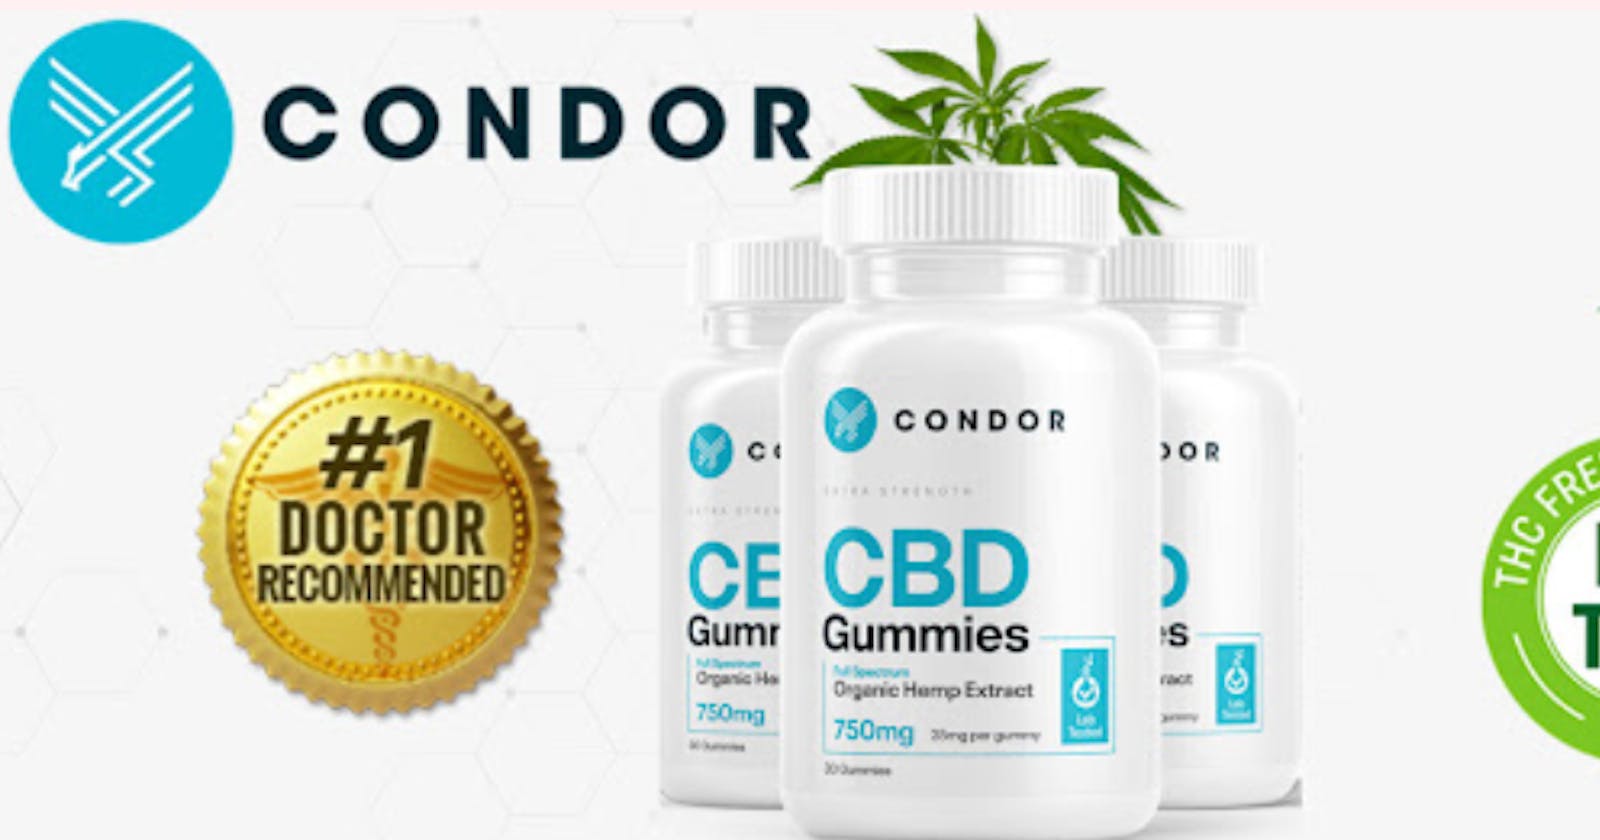 Condor CBD Gummies Reviews, Shark Tank, Side Effects, Scam, Amazon Reviews, For ED, For Copd Reviews, Official Website, Erectile Dysfunction?